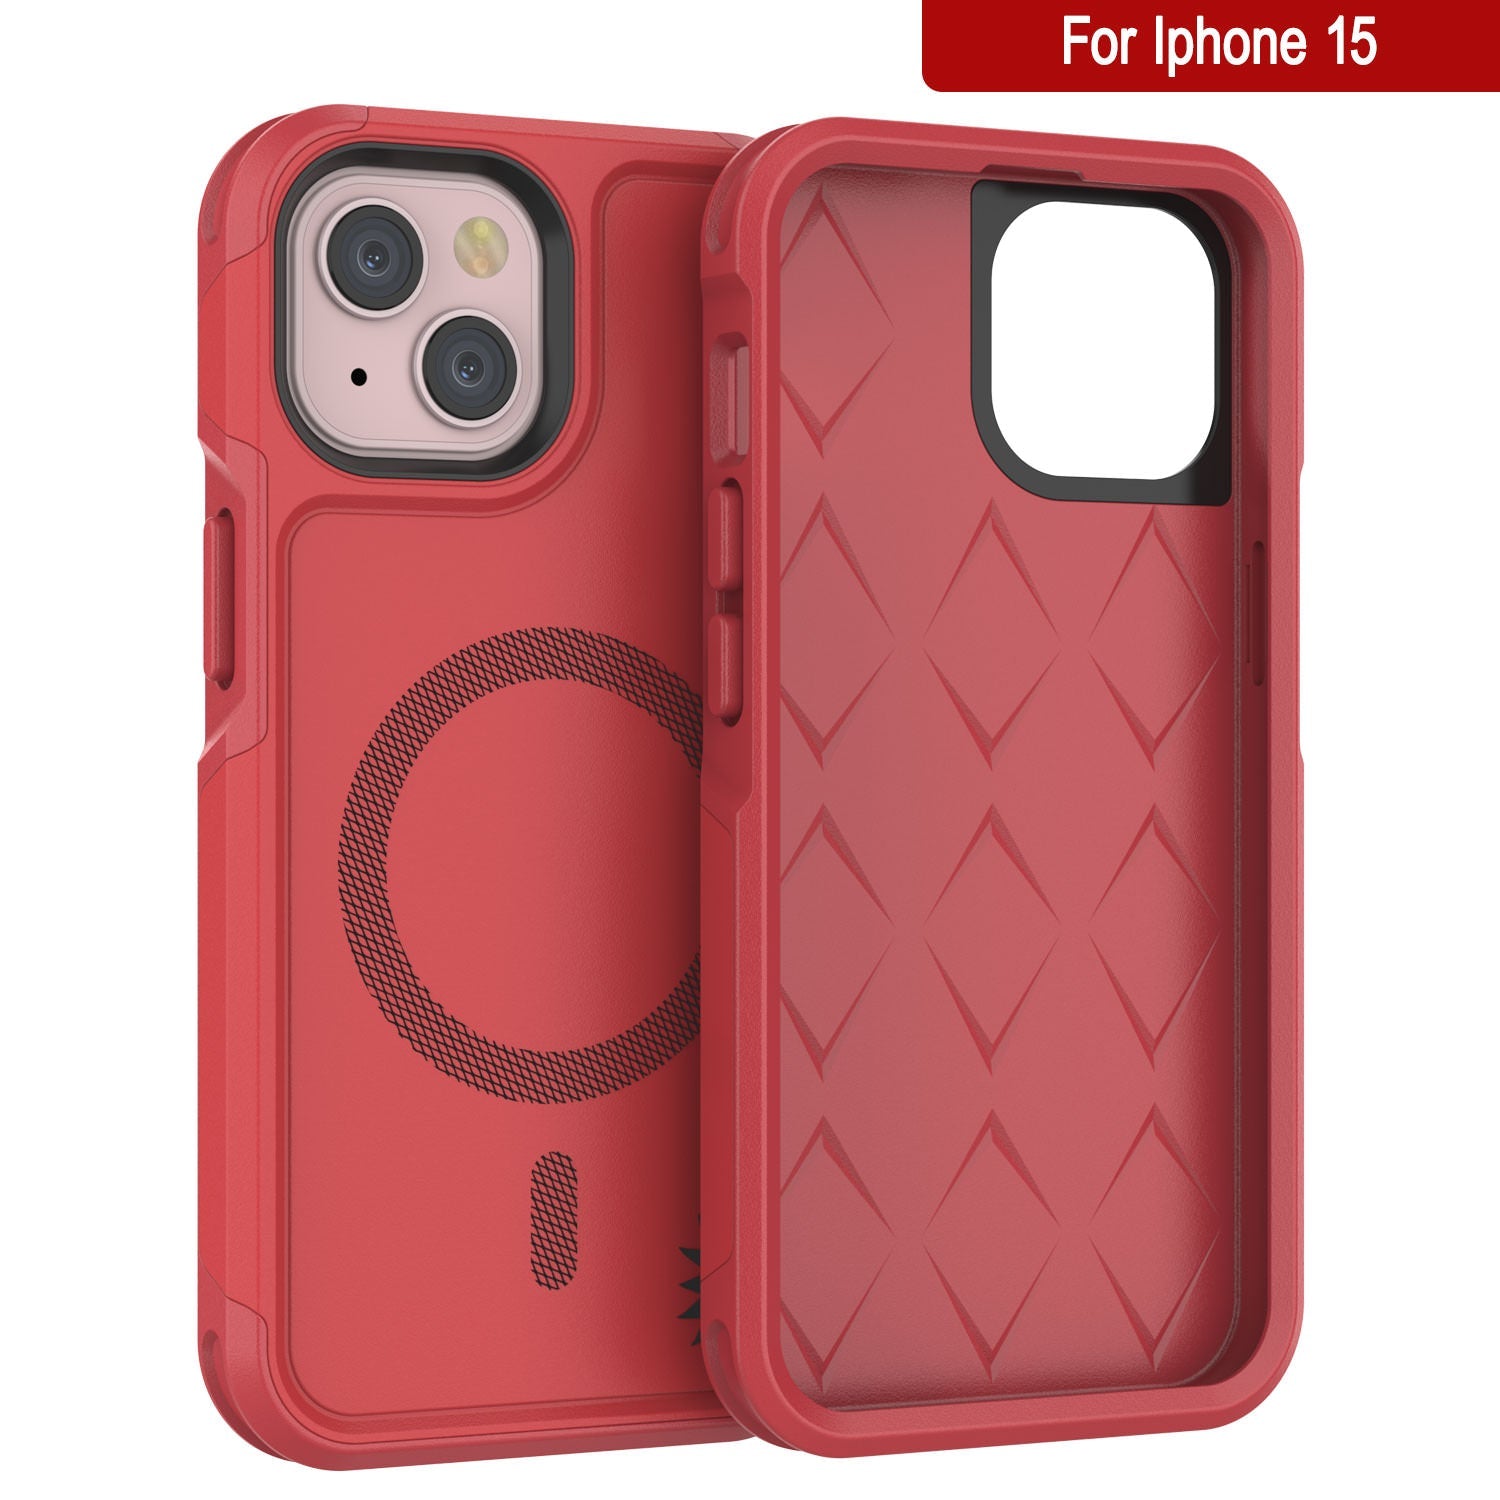 PunkCase iPhone 15 Case, [Spartan 2.0 Series] Clear Rugged Heavy Duty Cover W/Built in Screen Protector [red]